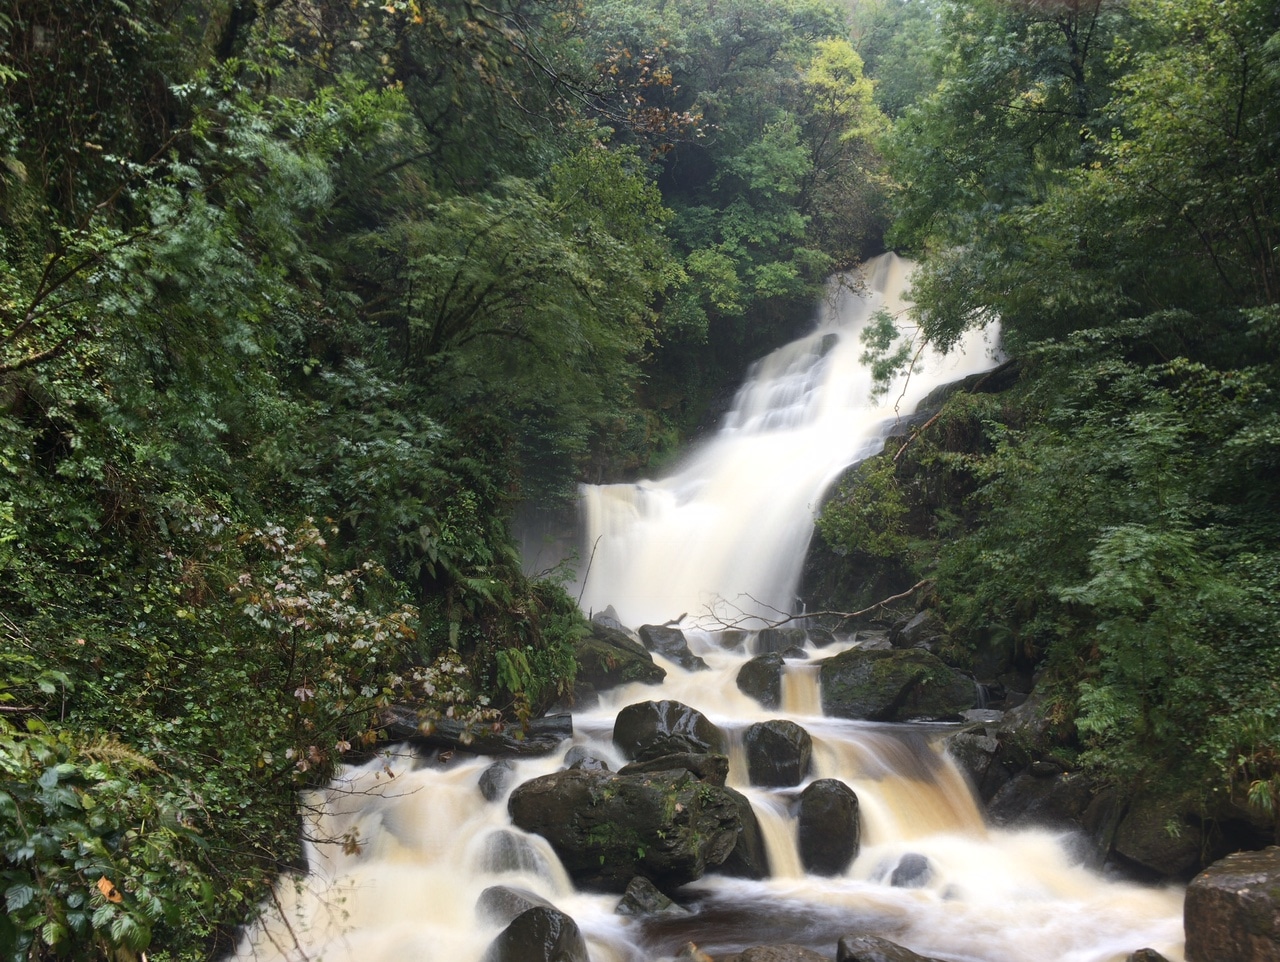 Even though the hike was longer than expected to get to the Torc Waterfall, it was worth it. - "What to See When You Visit Killarney National Park" - Two Traveling Texans